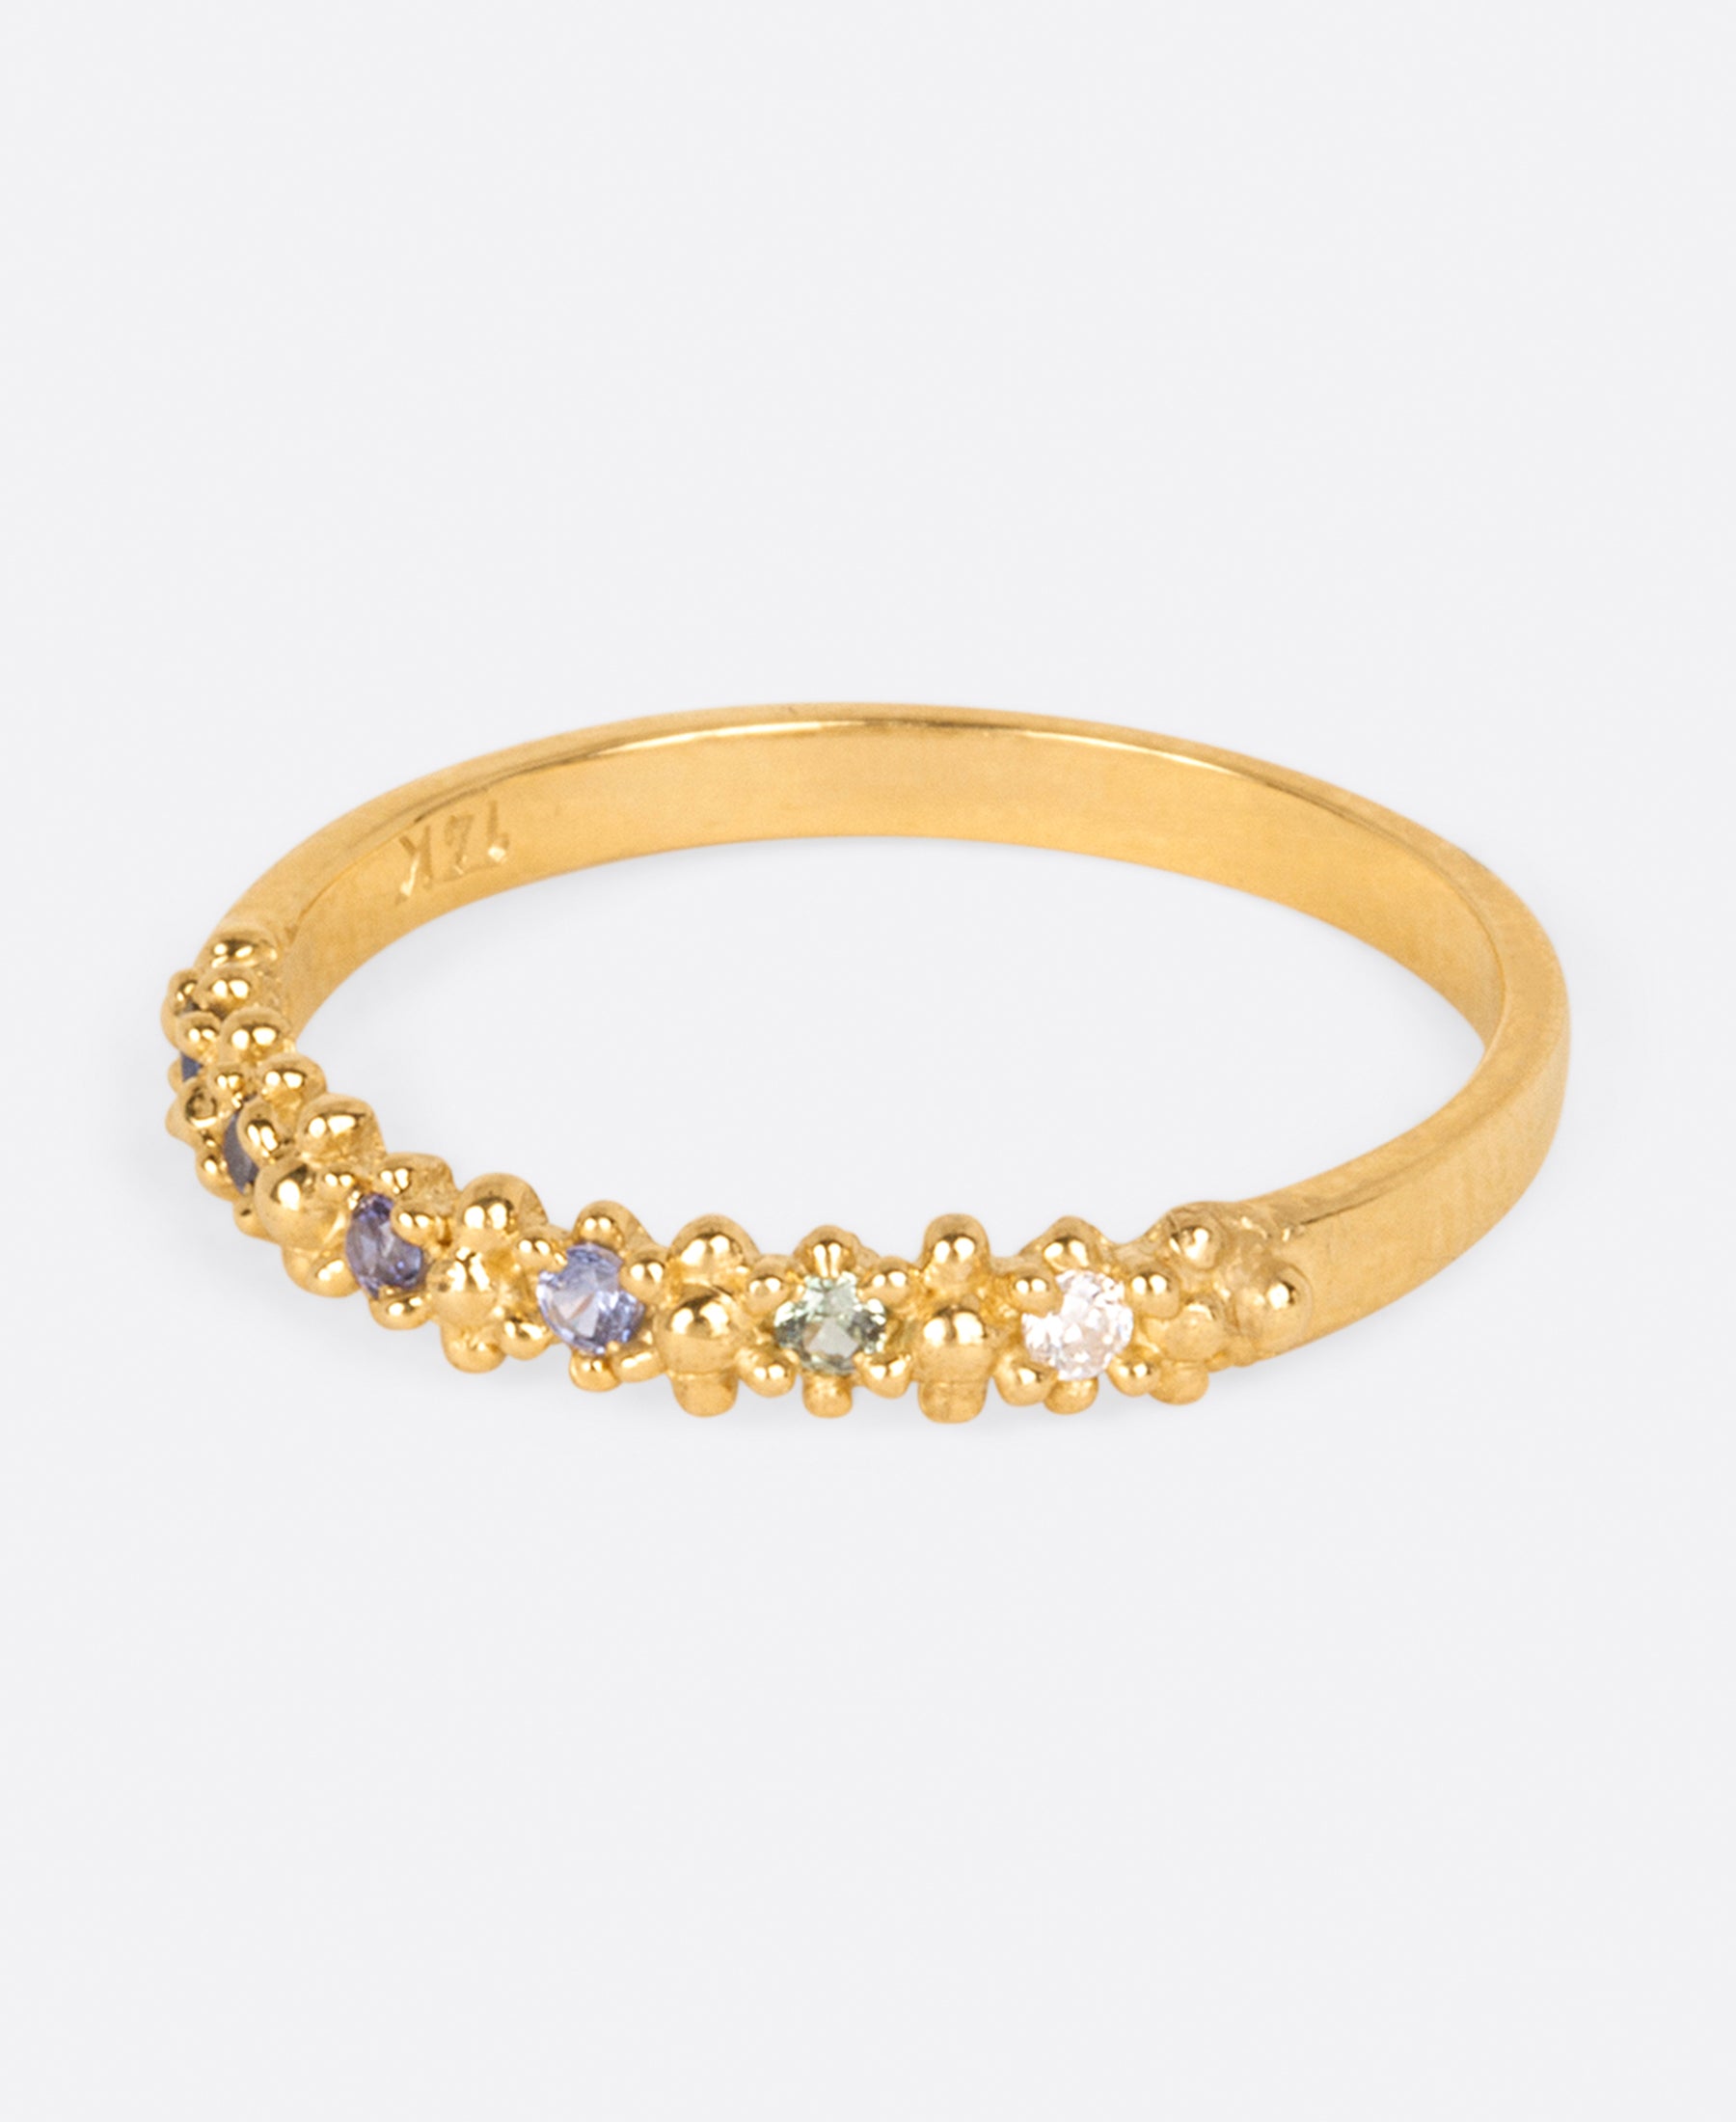 A textured yellow gold band with six sapphires in ombré order from white to dark blue, shown from the side.